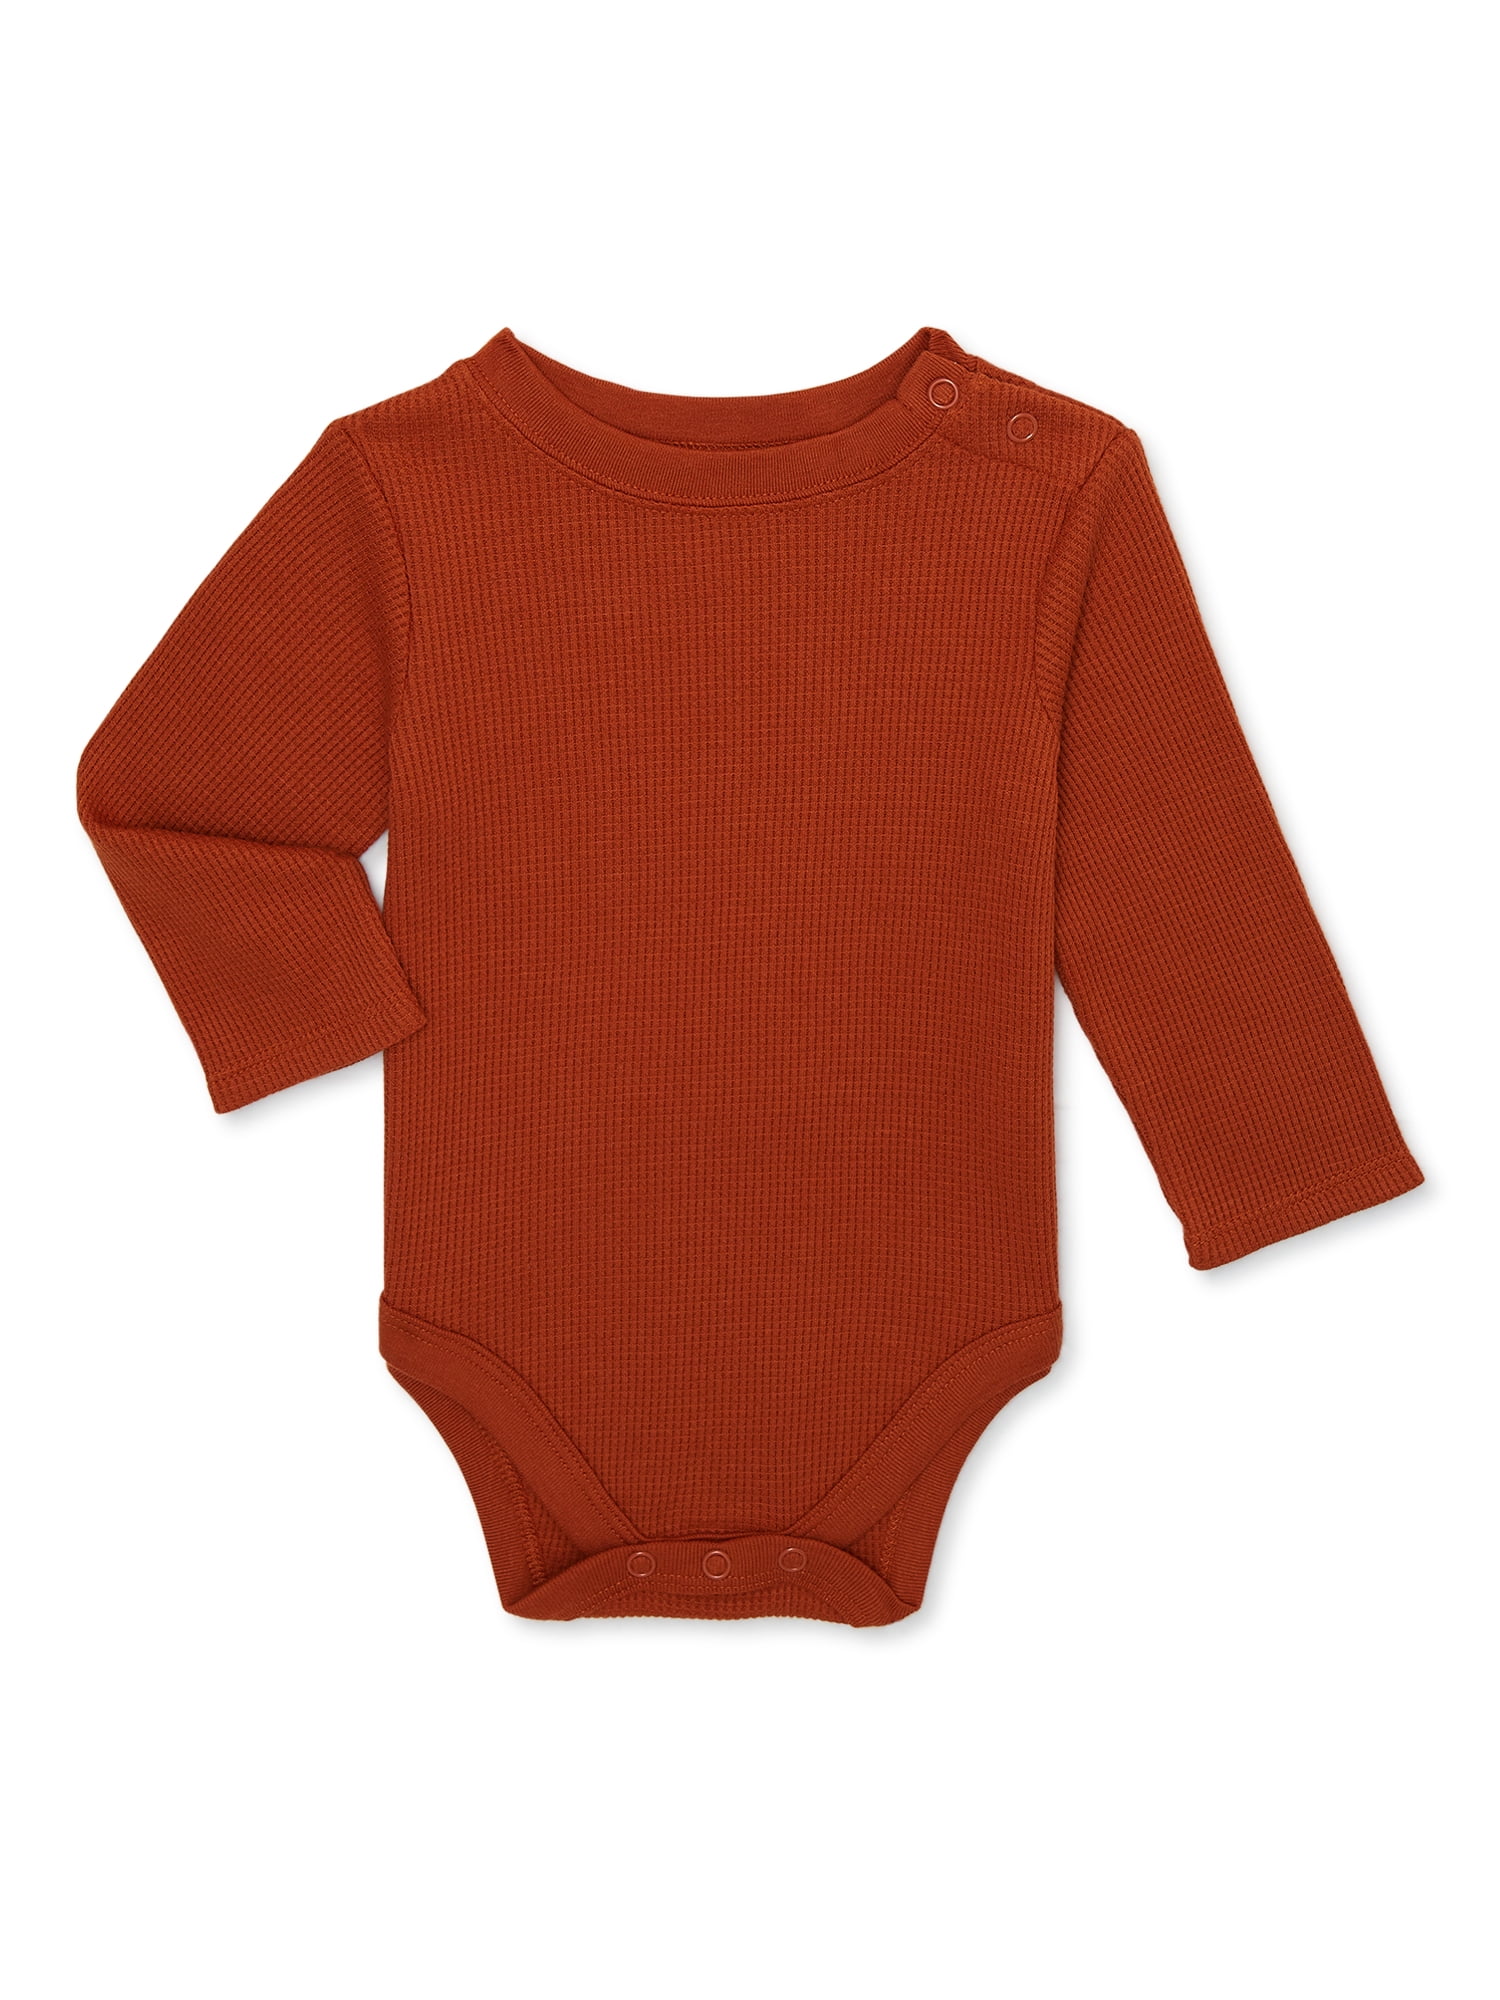 Garanimals Baby Boy Thermal Bodysuit with Long Sleeves, Sizes 0/3 Months-24  Months 